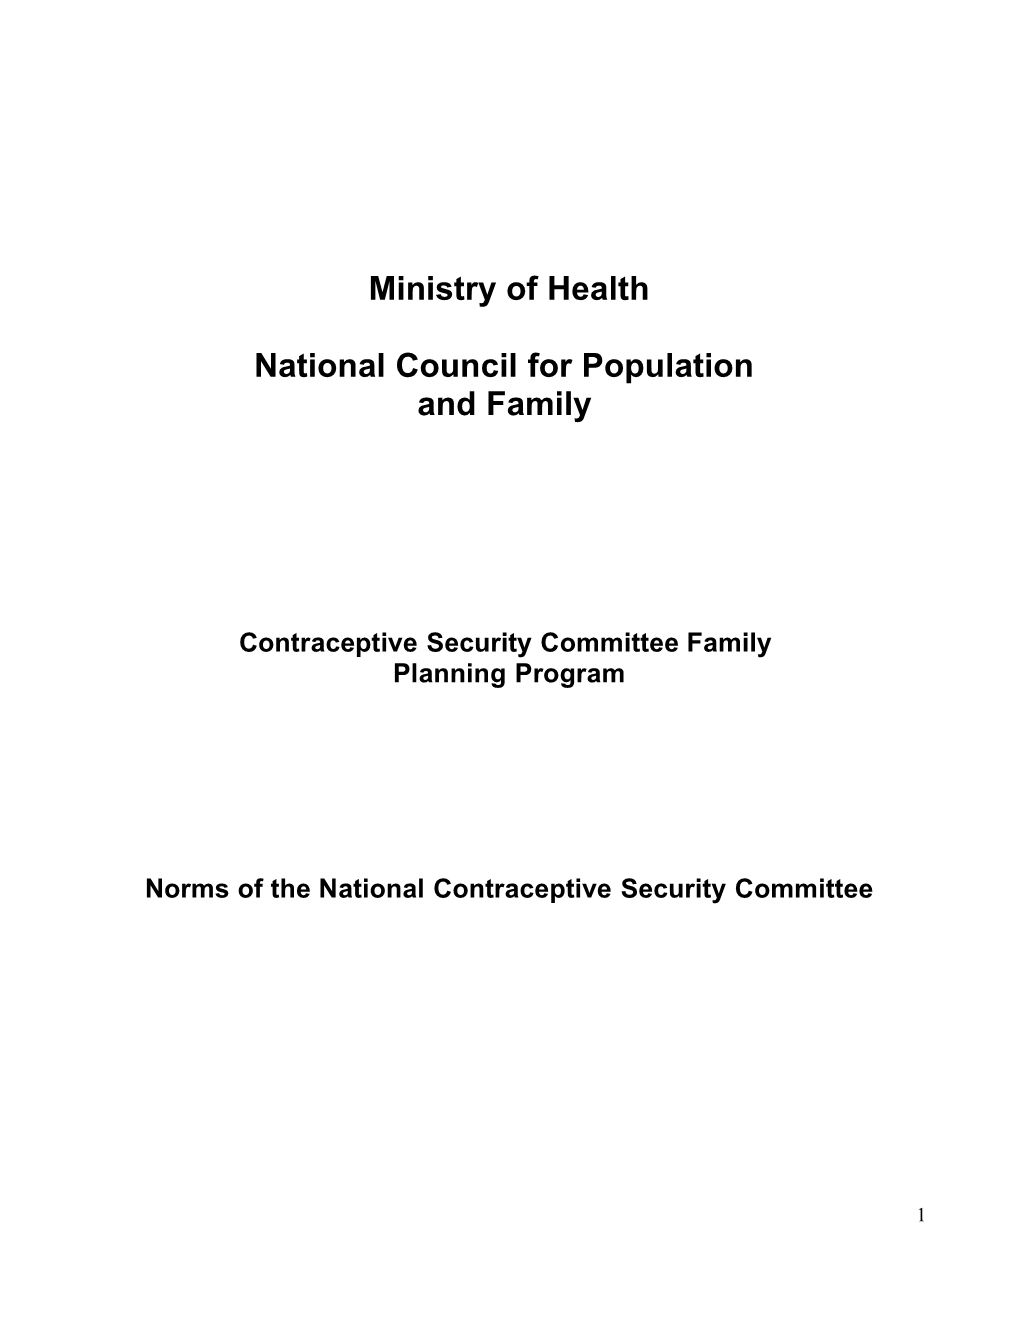 Normsofthe Nationalcontraceptivesecuritycommittee